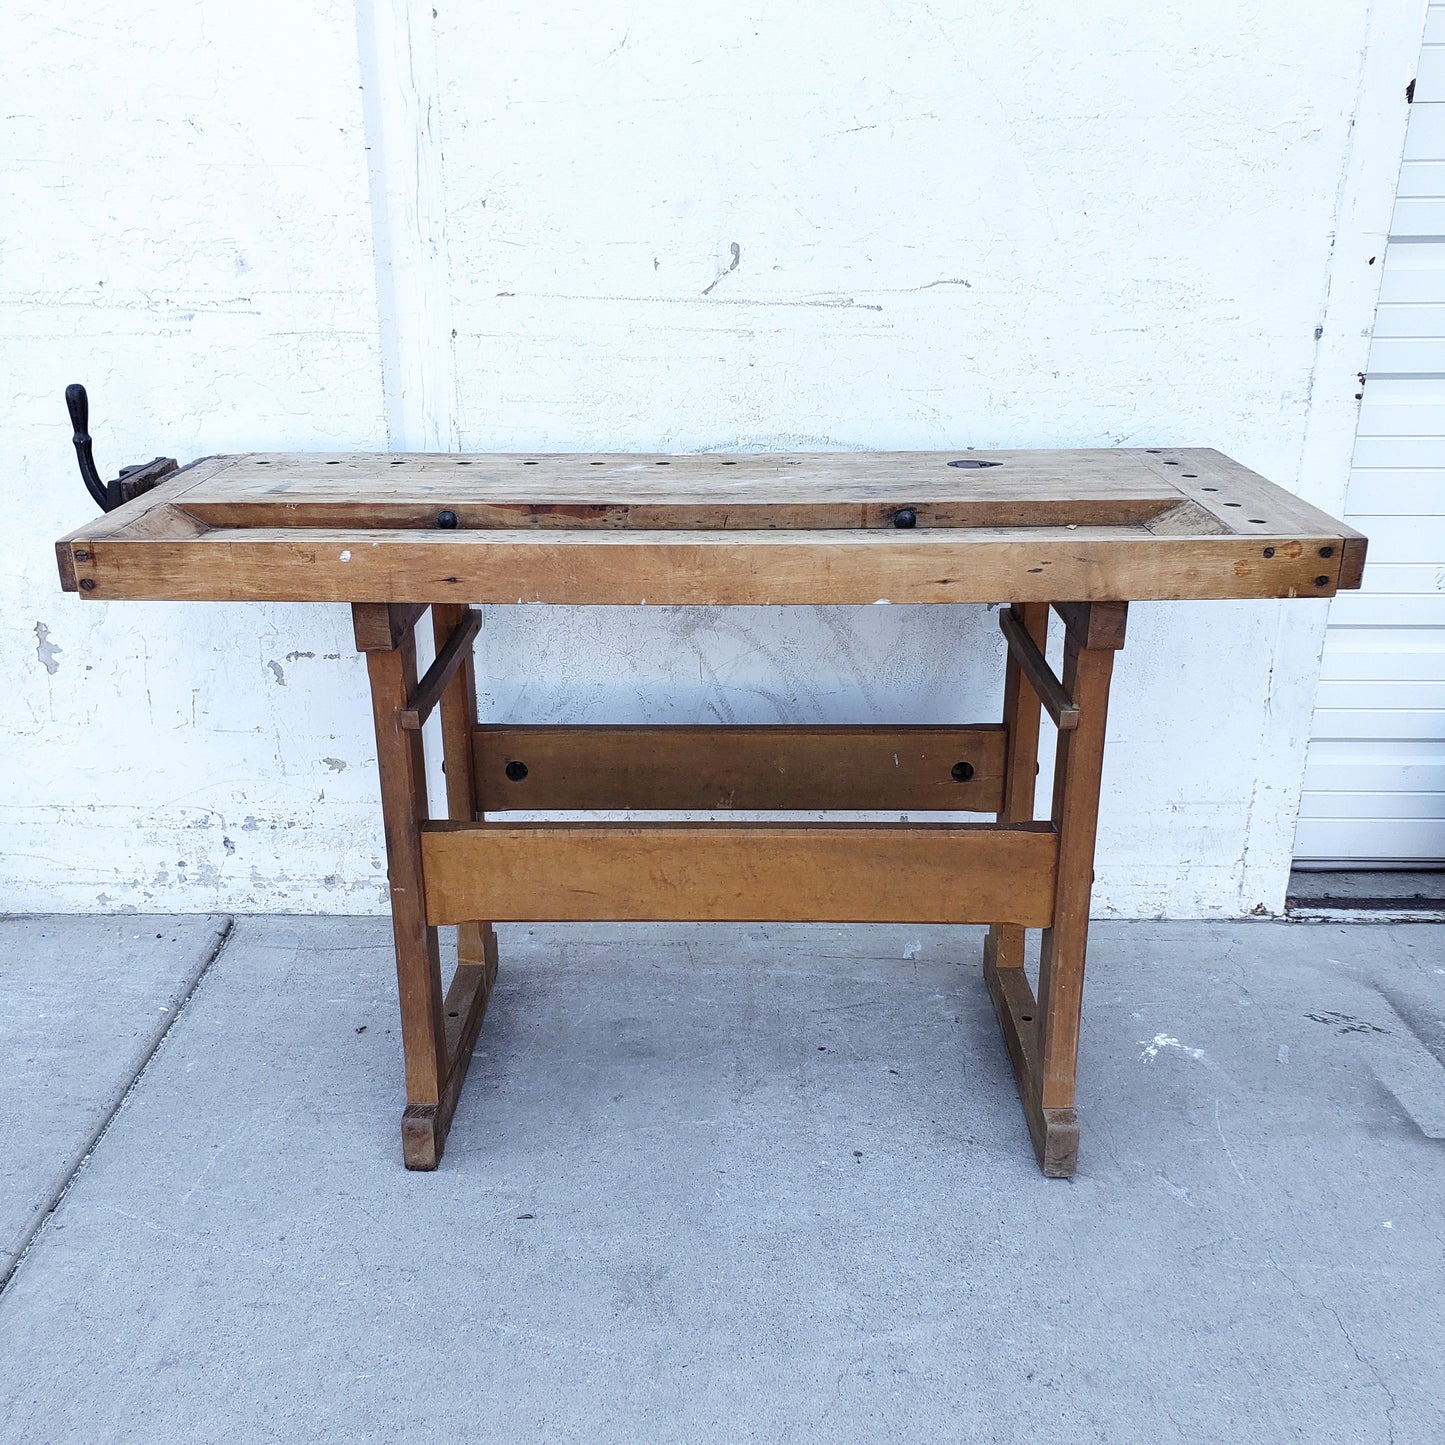 Small Wooden Work Table with Vice